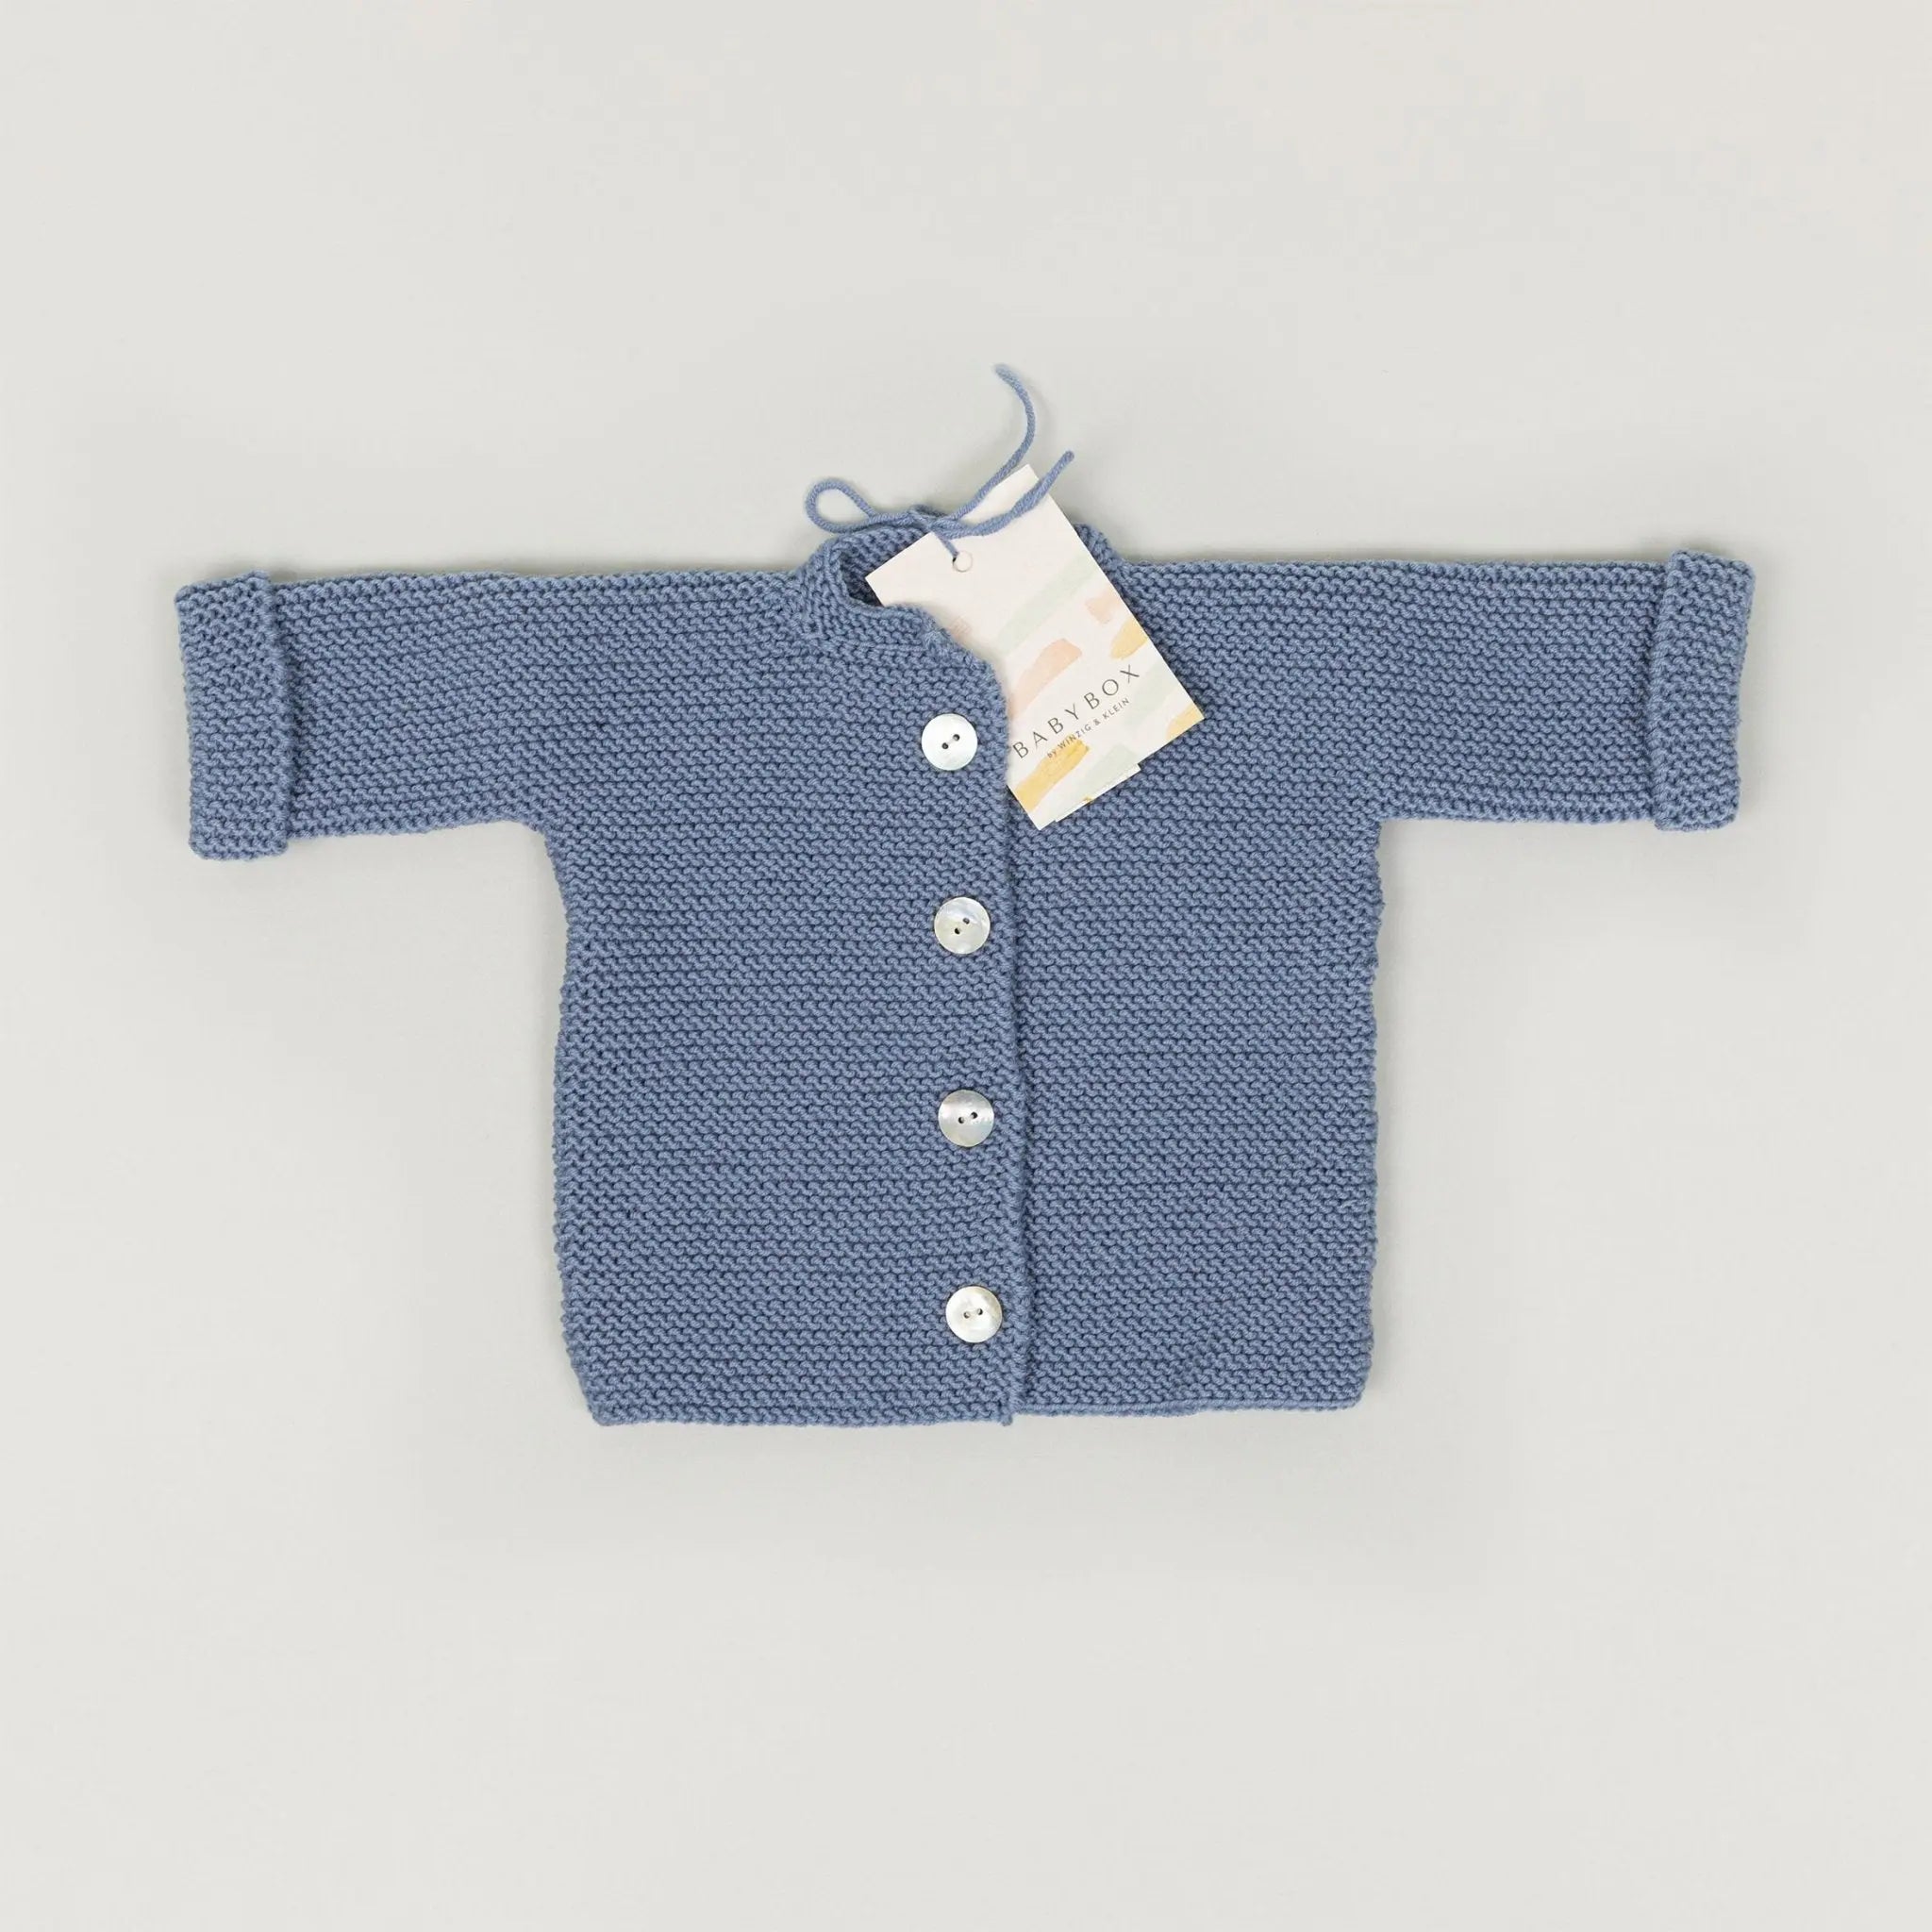 Babybox and Family BabyBox Collection Handmade Strickjacke aus Wolle 6-12m senf #farbe_6-12m